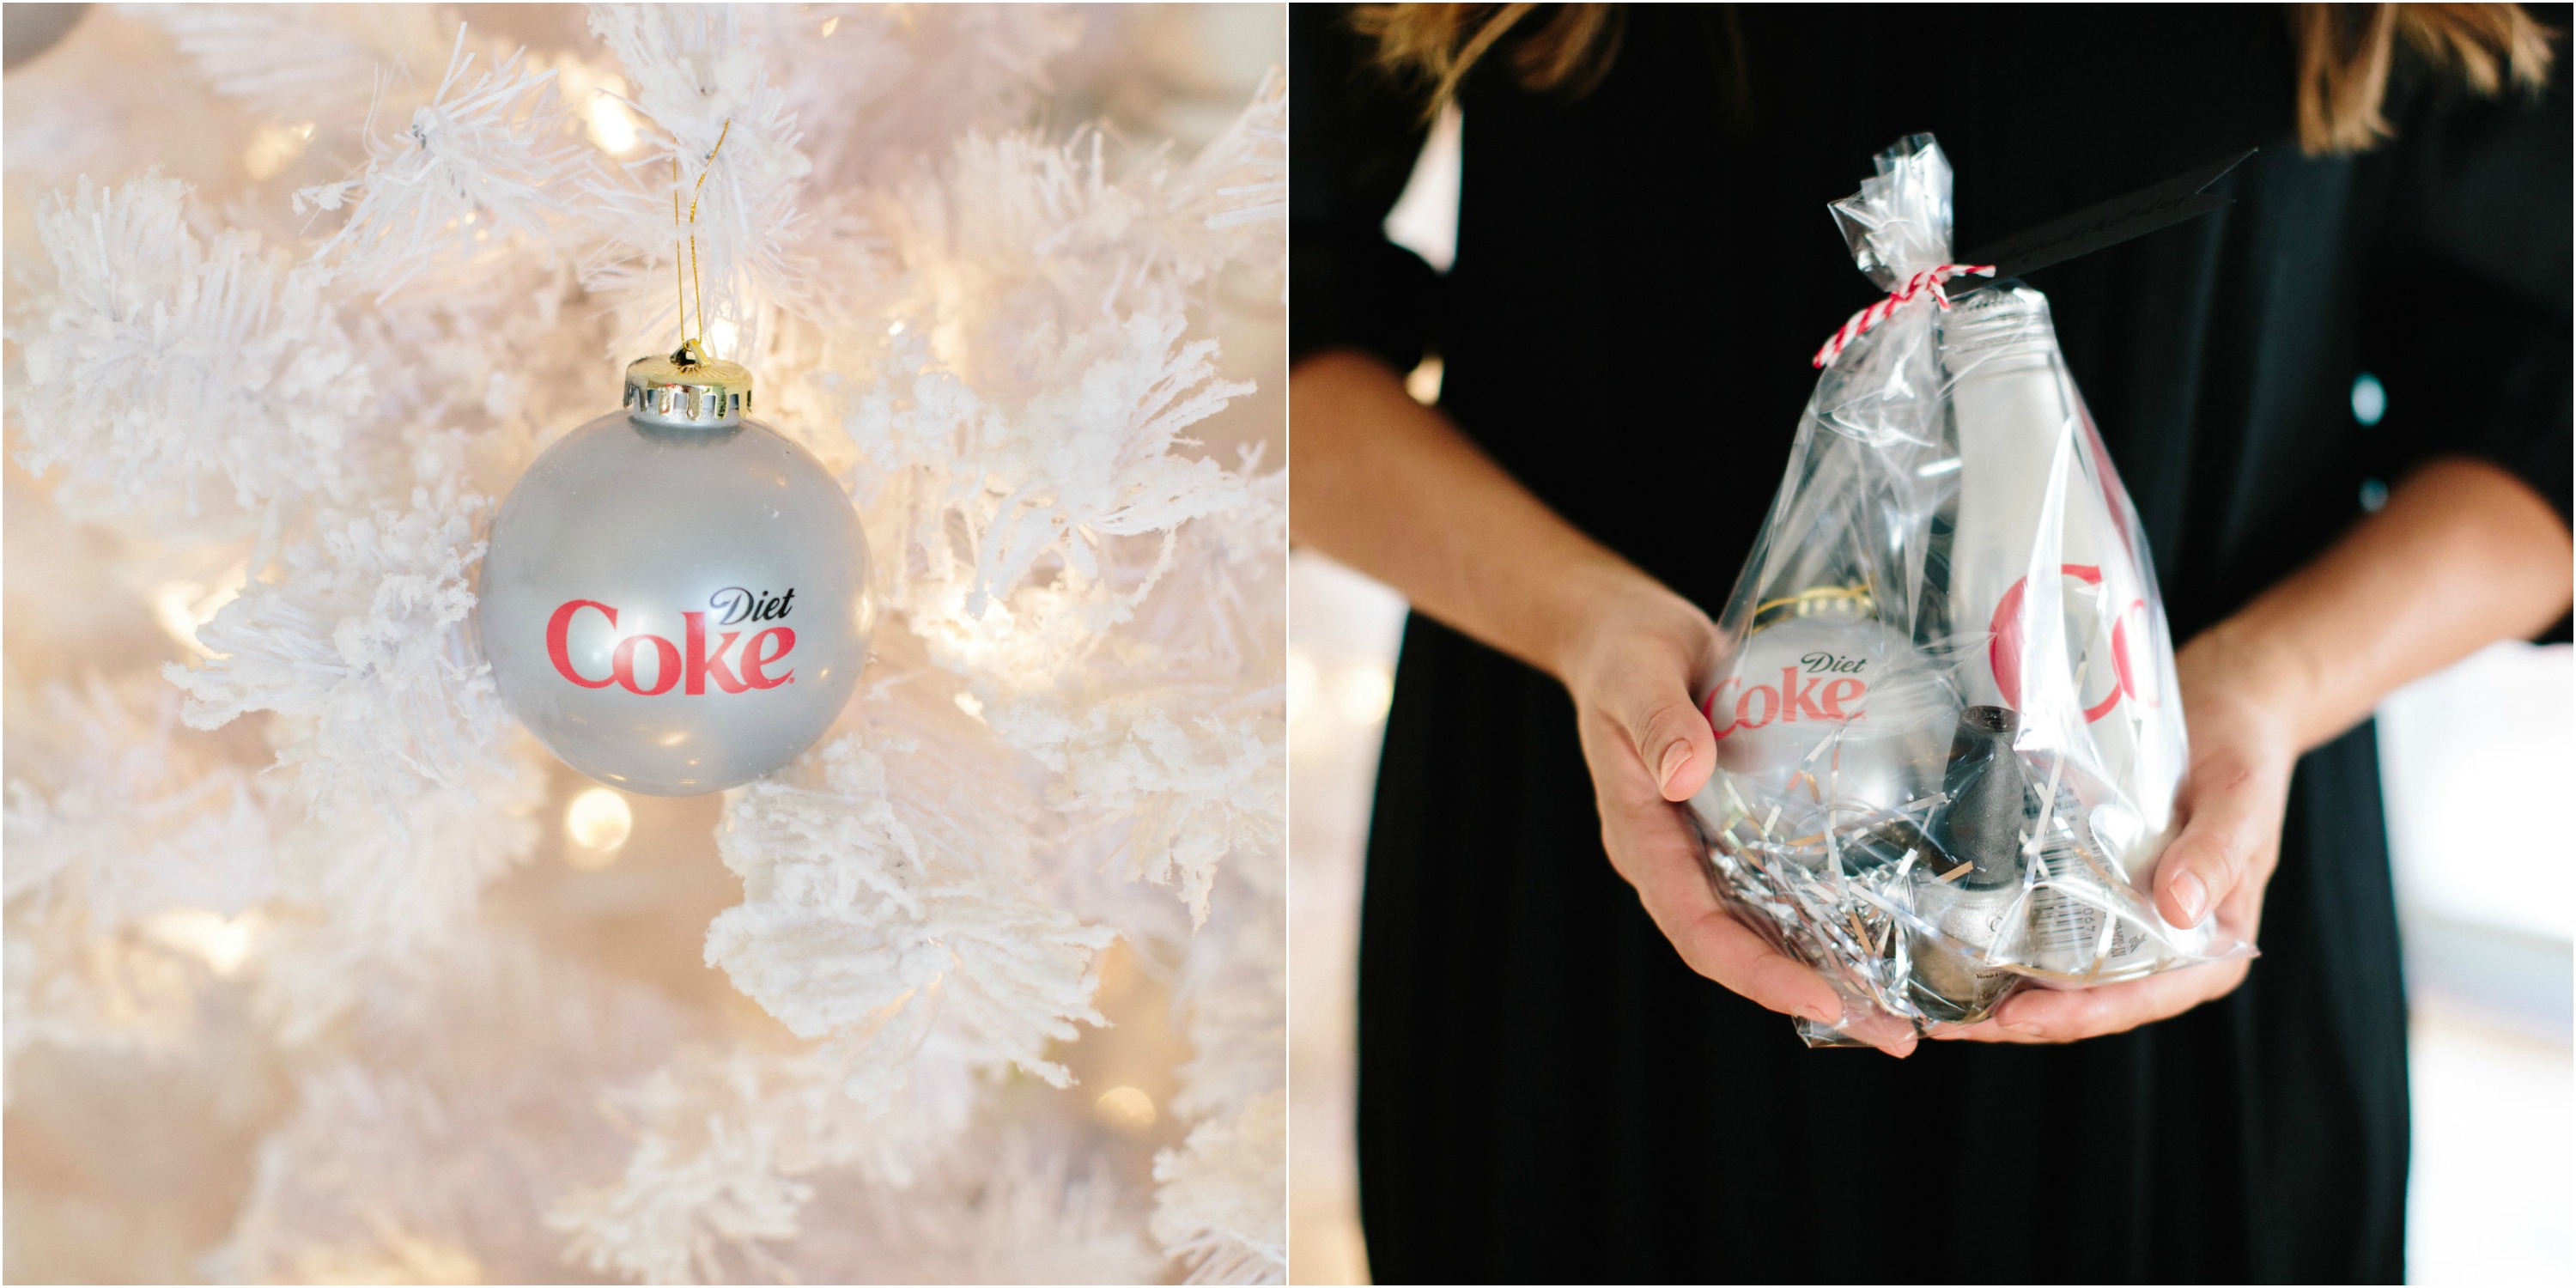 diet-coke-for-the-holidays - Simple Holiday Entertaining by popular North Carolina blogger Coffee Beans and Bobby Pins